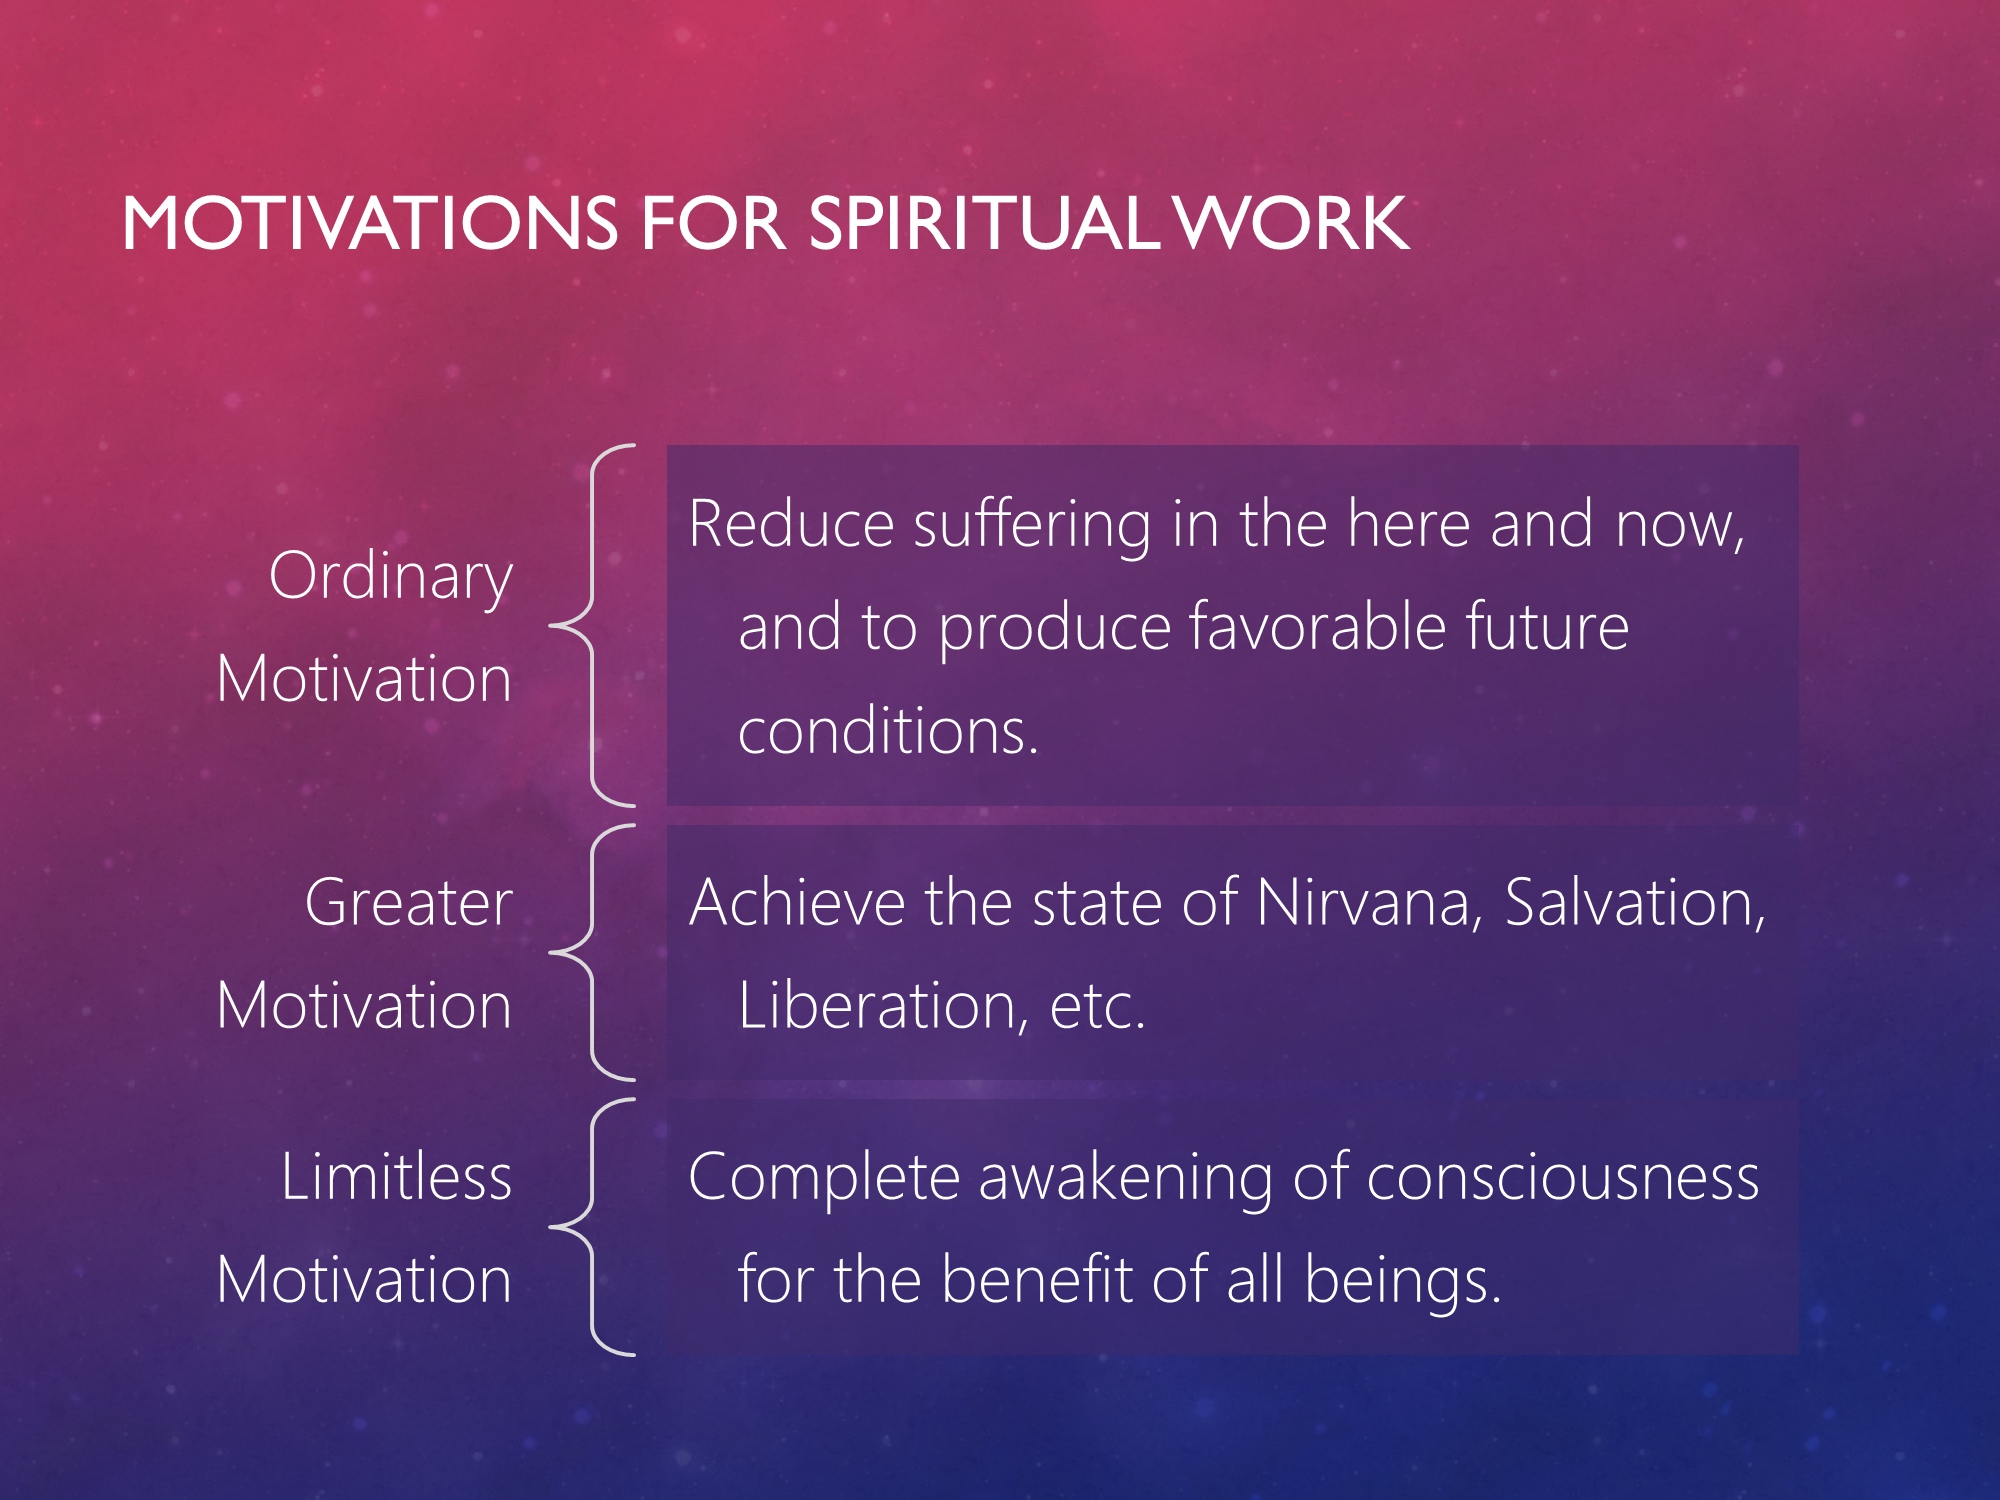 Three Levels of Motivation for Spiritual Work